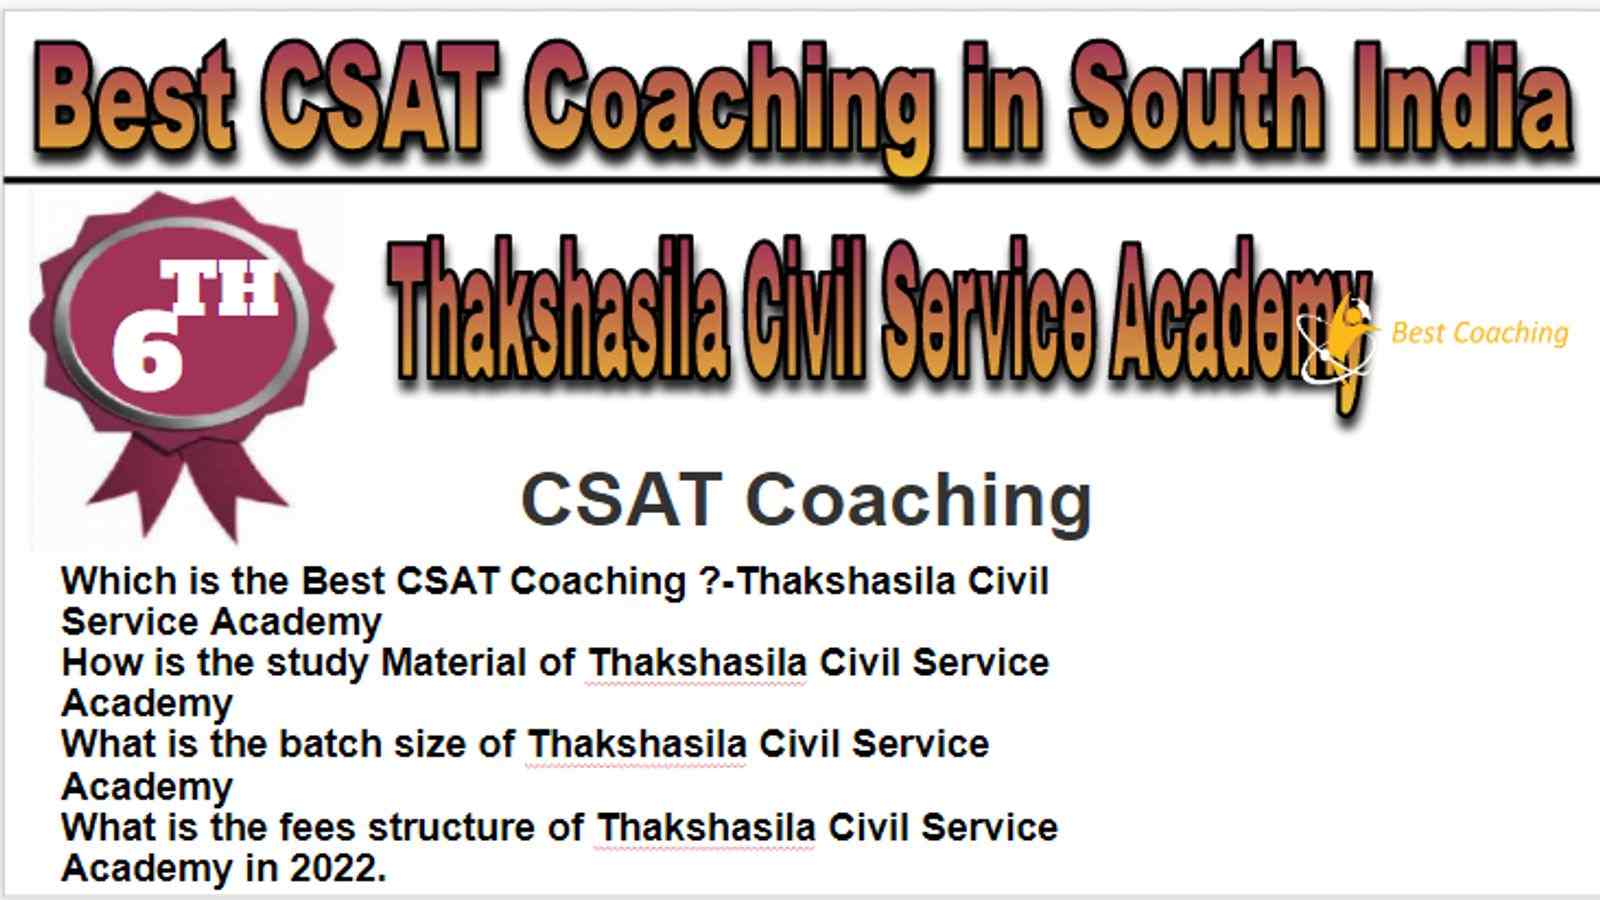 Rank 6 Best CSAT Coaching in South India